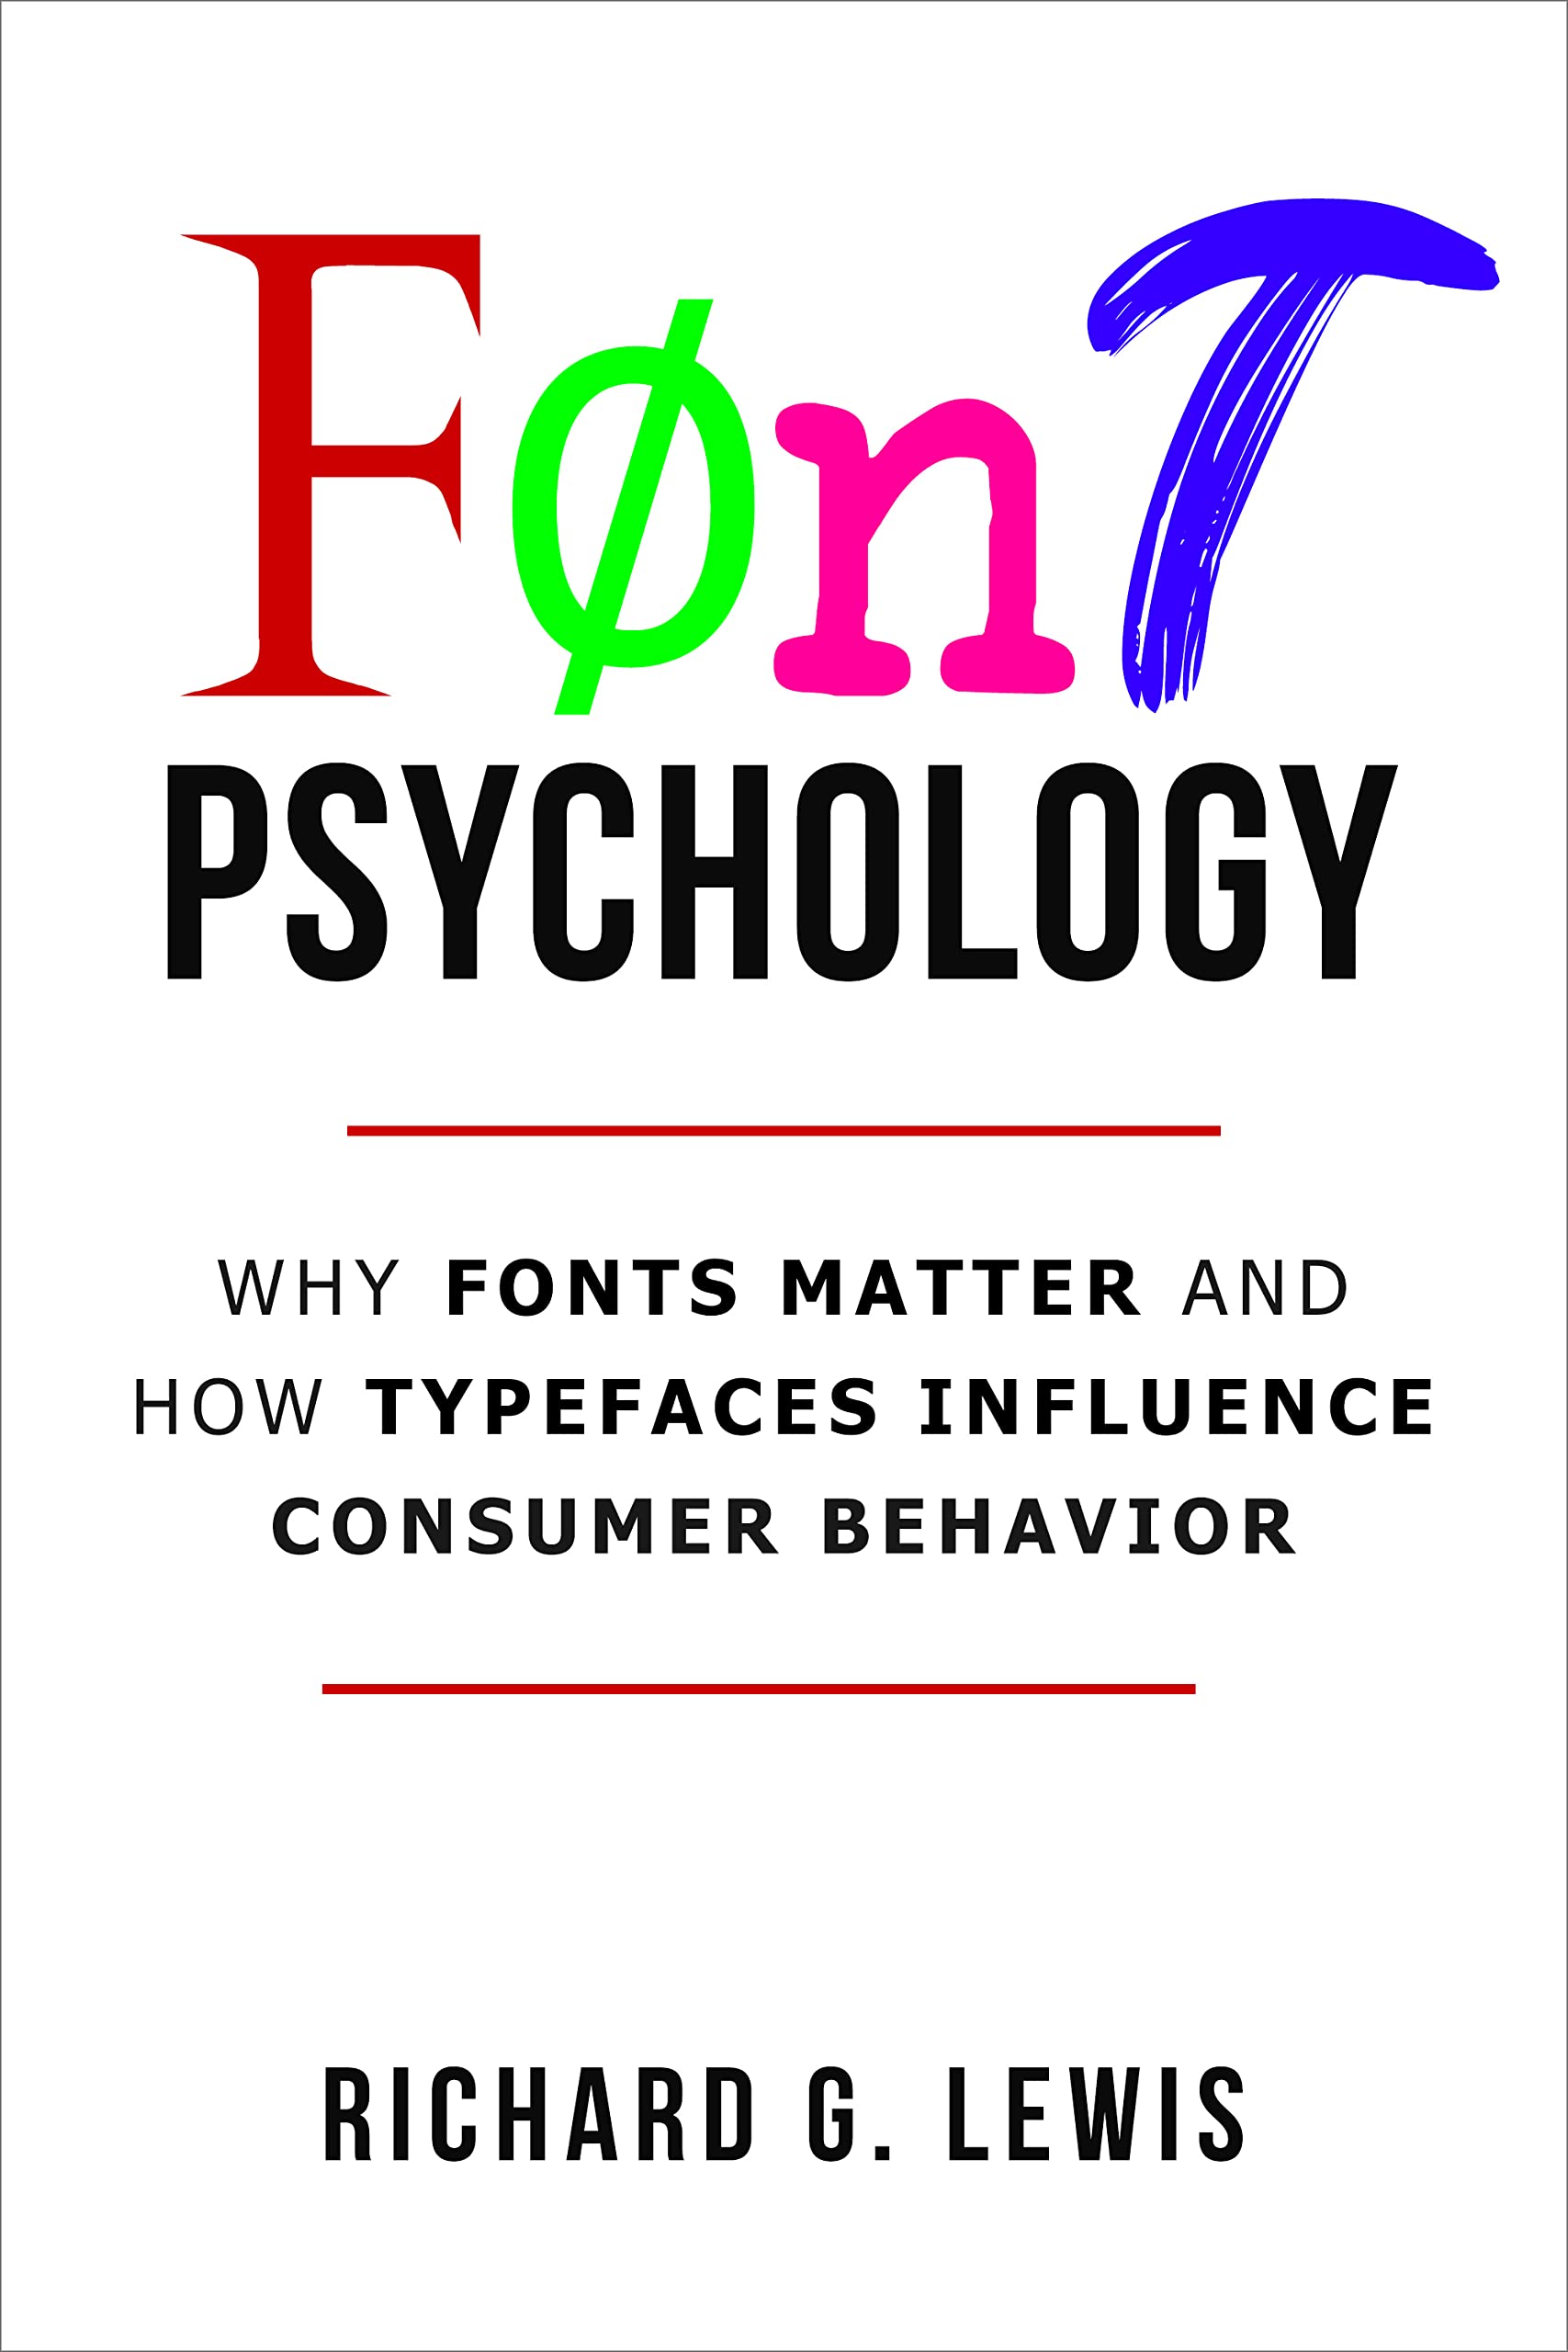 Font Psychology: Why Fonts Matter and How They Influence Consumer Behavior (PsychoProfits)